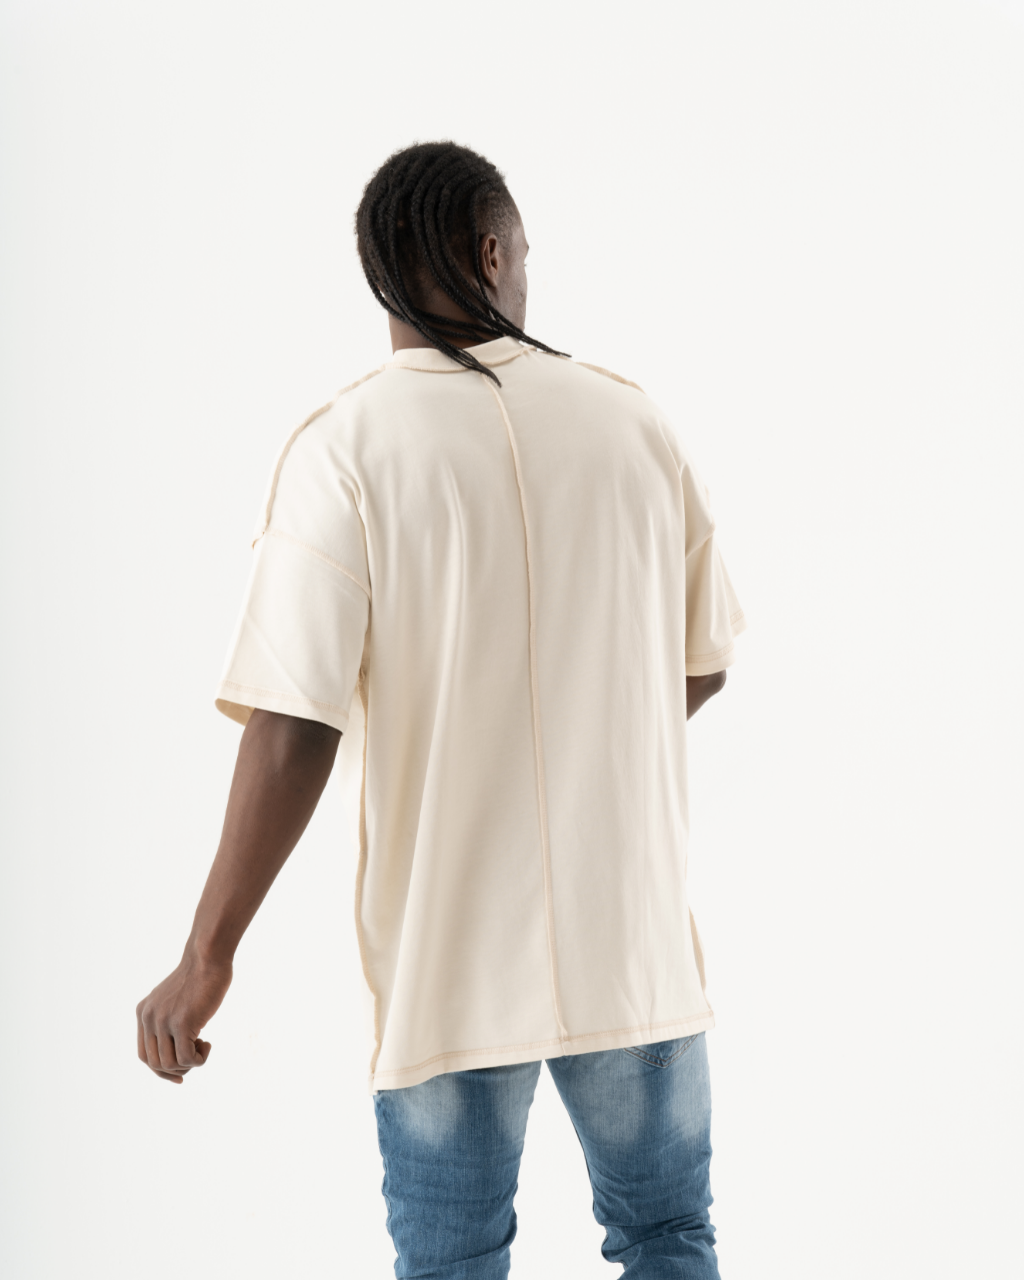 A man in jeans and the MENTALIST T-SHIRT | BEIGE is walking backwards.